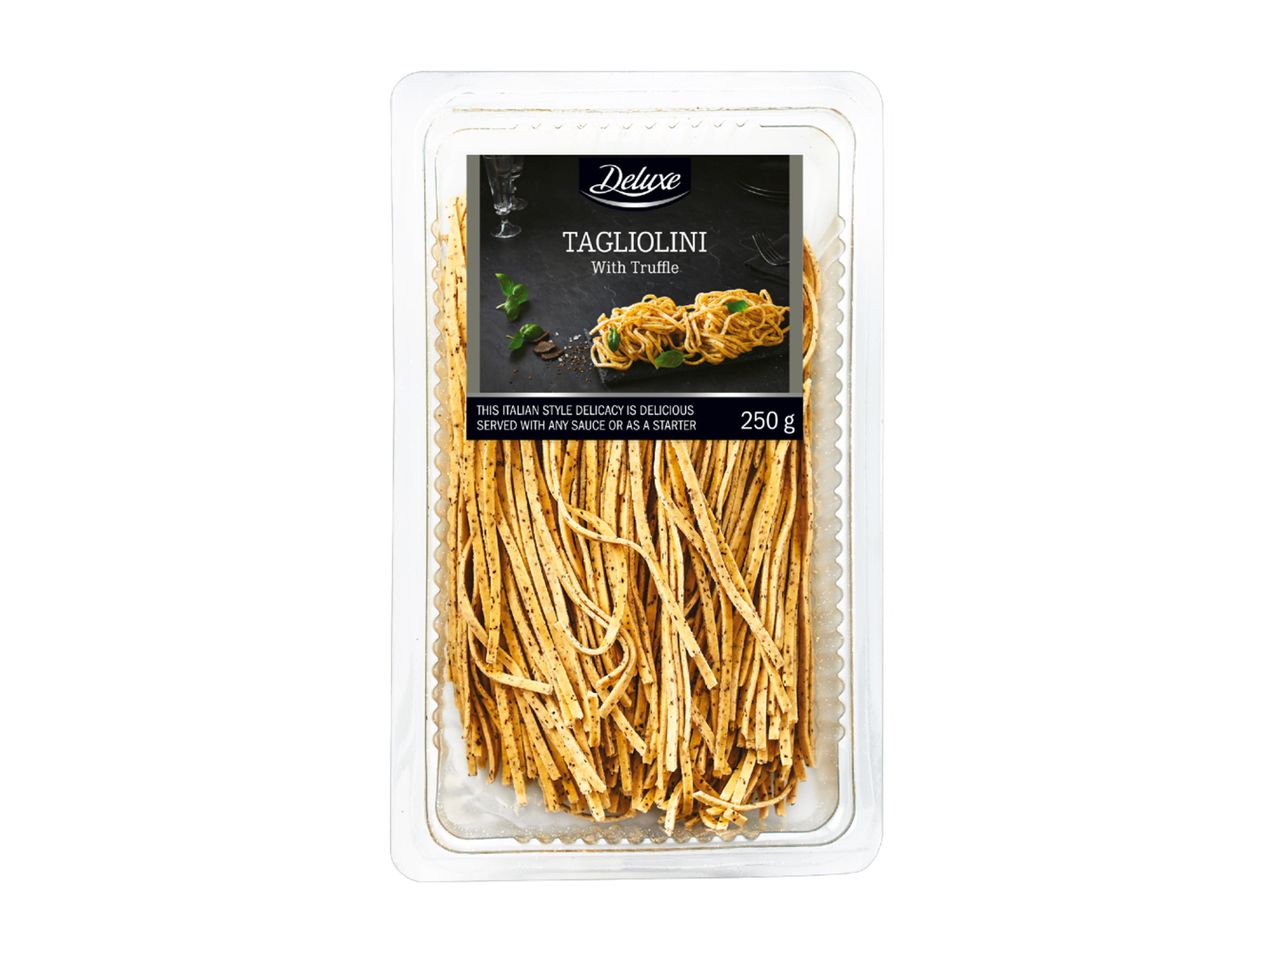 Go to full screen view: Deluxe Tagliolini Refined with Truffle - Image 1